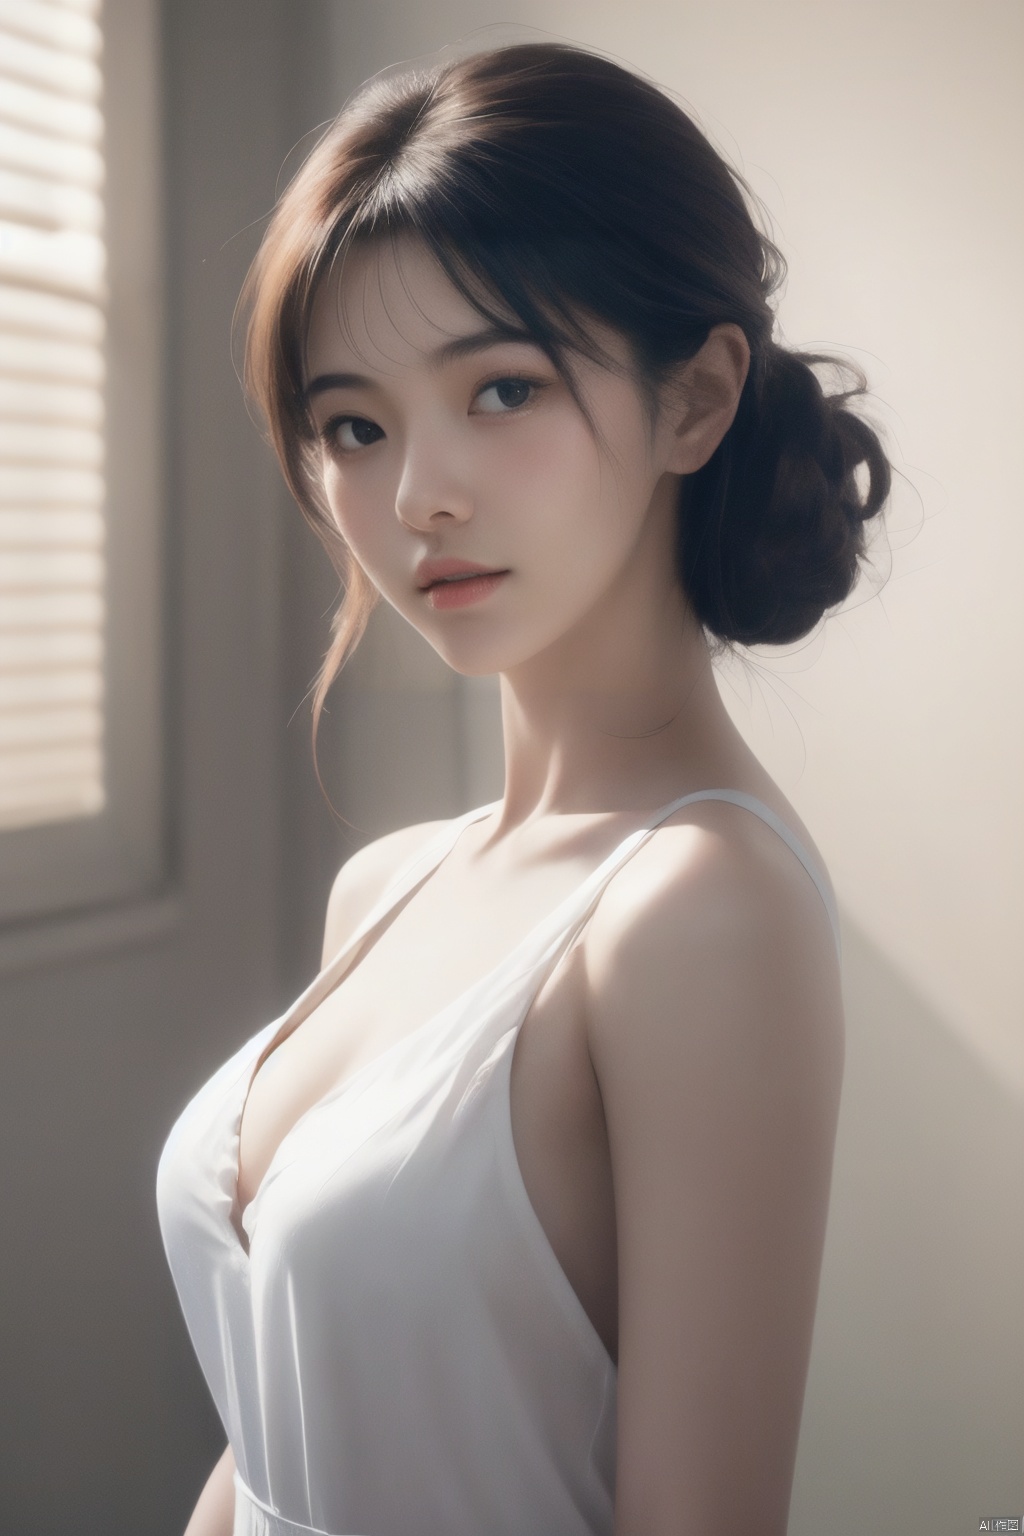 1girl, 1girl, looking at viewer, RAW photo, photorealistic:1.37, realistic, highly detailed CG unified 8K wallpapers, thick body:1.1, straight from front, HQ skin:1.8, shiny skin, 8k uhd, Fujifilm XT3, professional lighting:1.6, Immaculate skin, jujingyi, Cowboy lens, Upper body, soft lighting, film grain, high quality, white dress, bra, big boobs, white_skin, film sense, grainy,,,